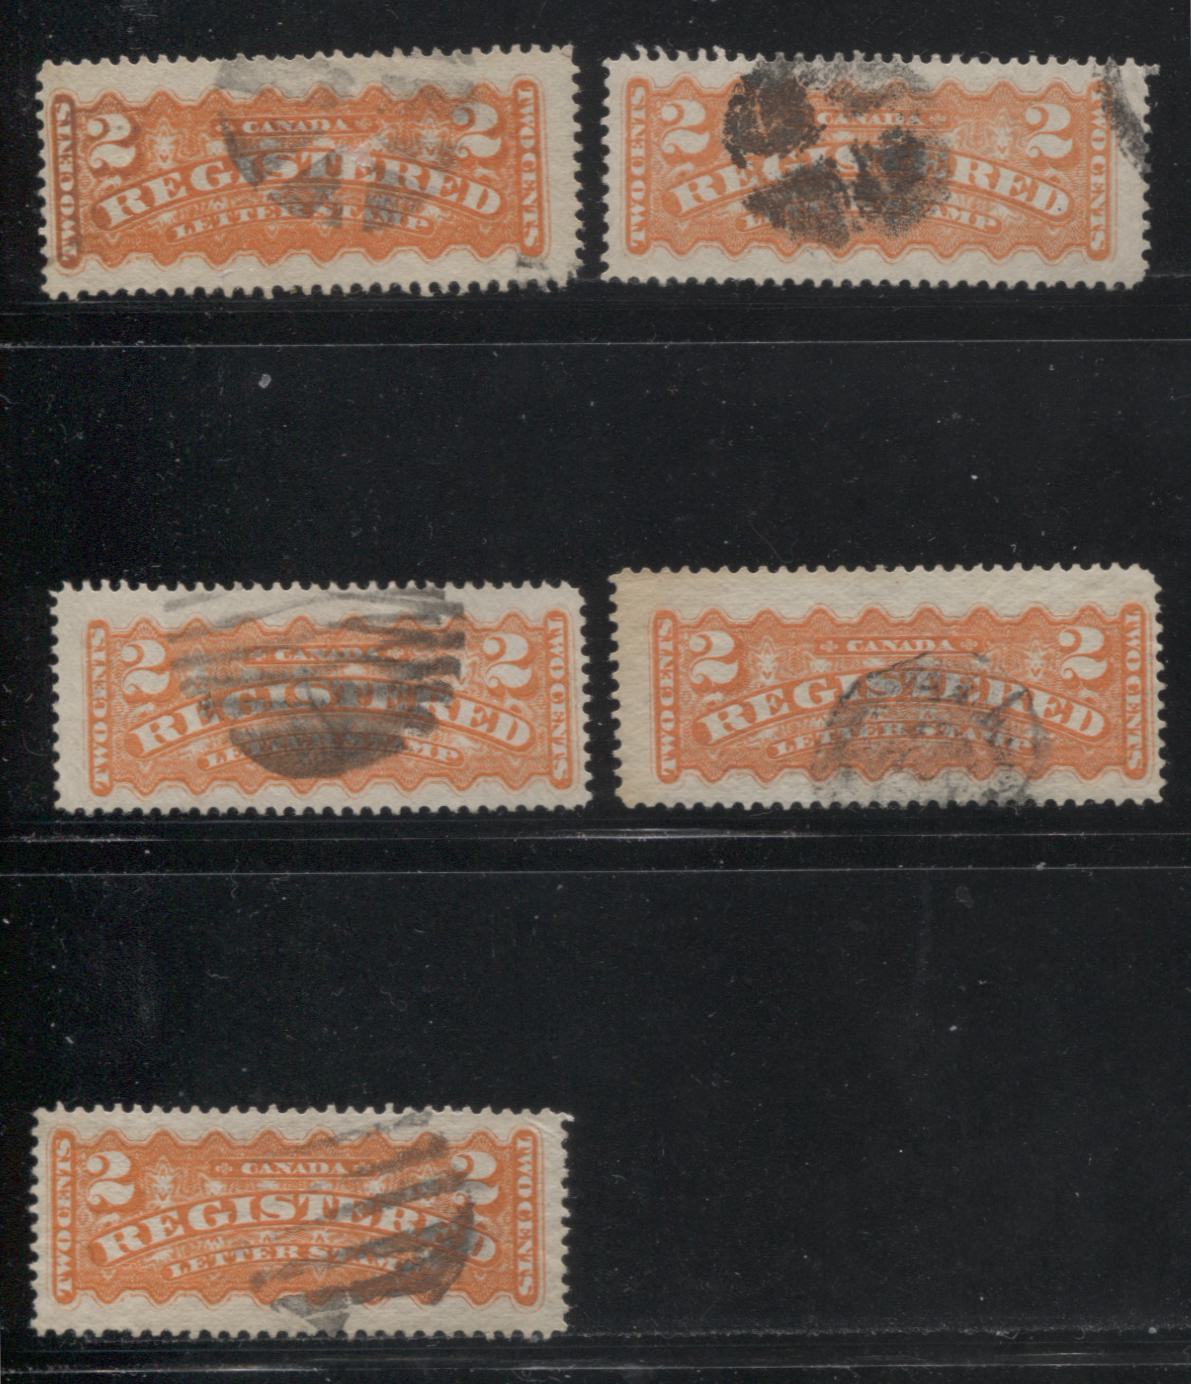 Lot 189 Canada #F1 2c Orange Engine Turning, 1875-1888 Registration Issue, Fine Used Examples Montreal, Various Perfs, Vertical and Horizontal Wove, Nice Range of Shades